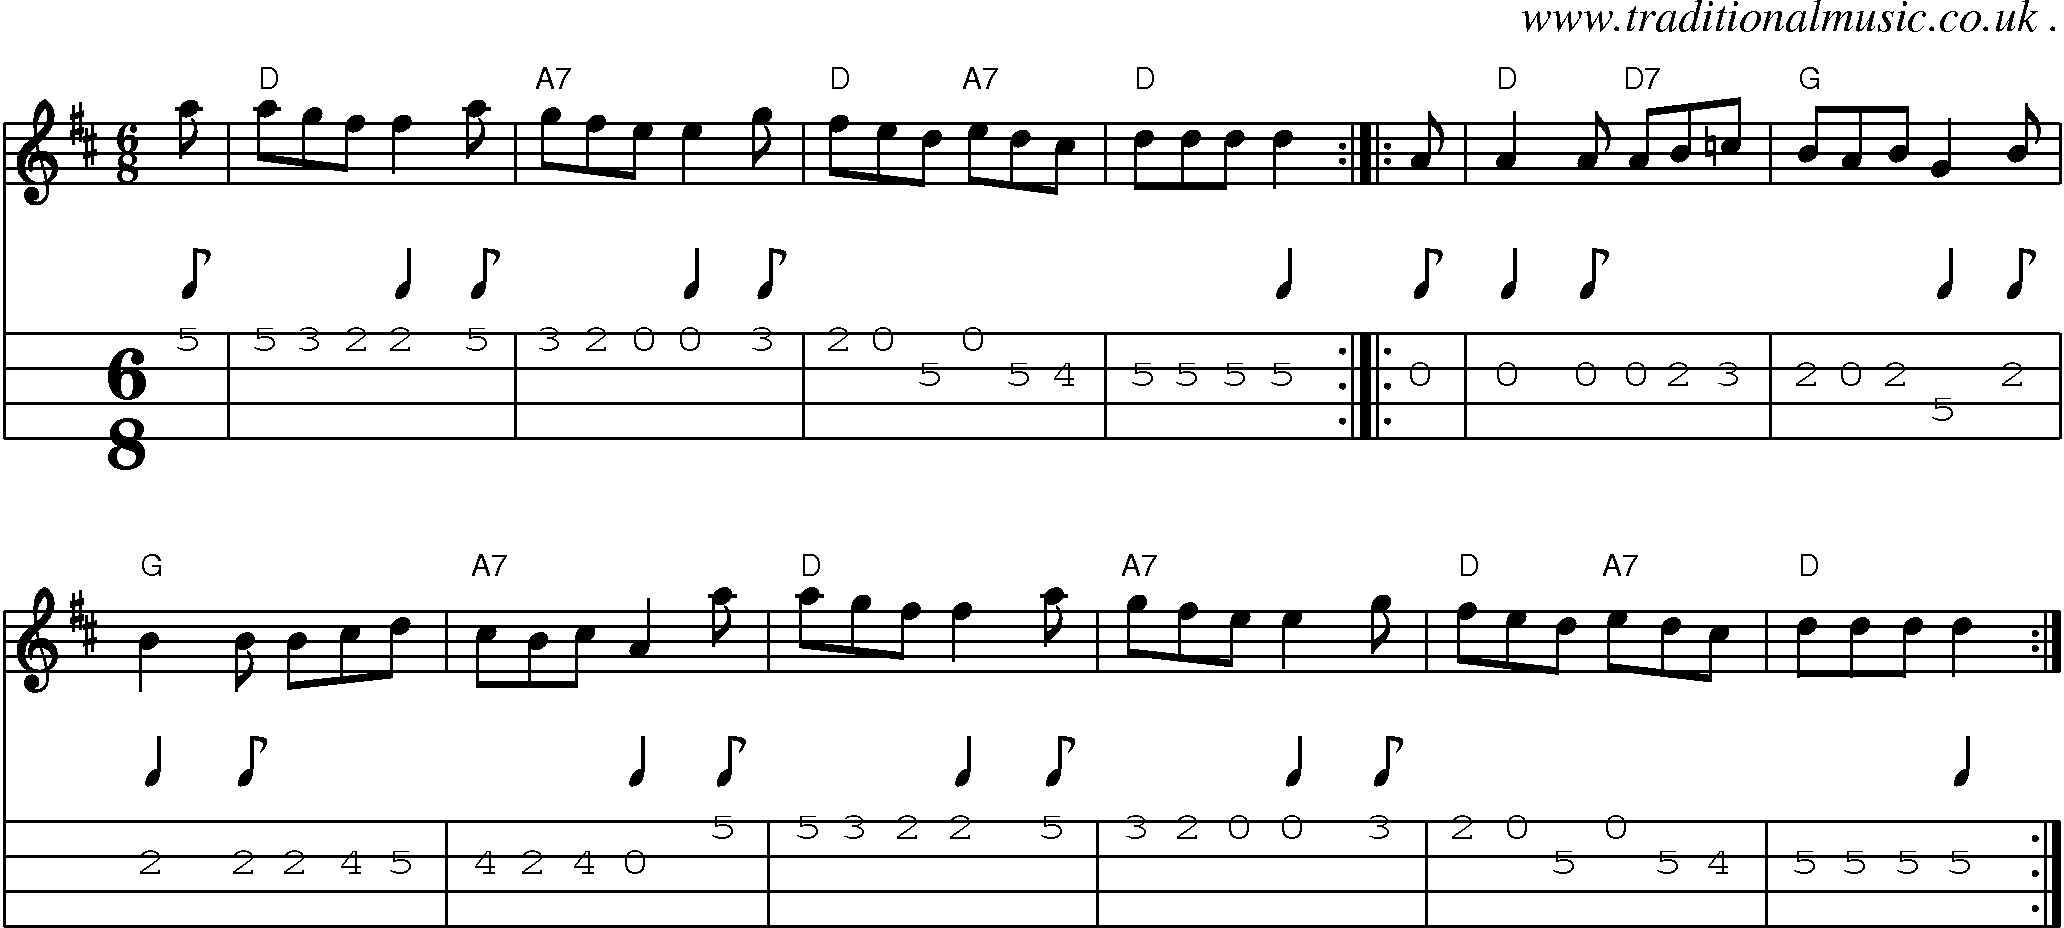 Sheet-music  score, Chords and Mandolin Tabs for The Addams Family